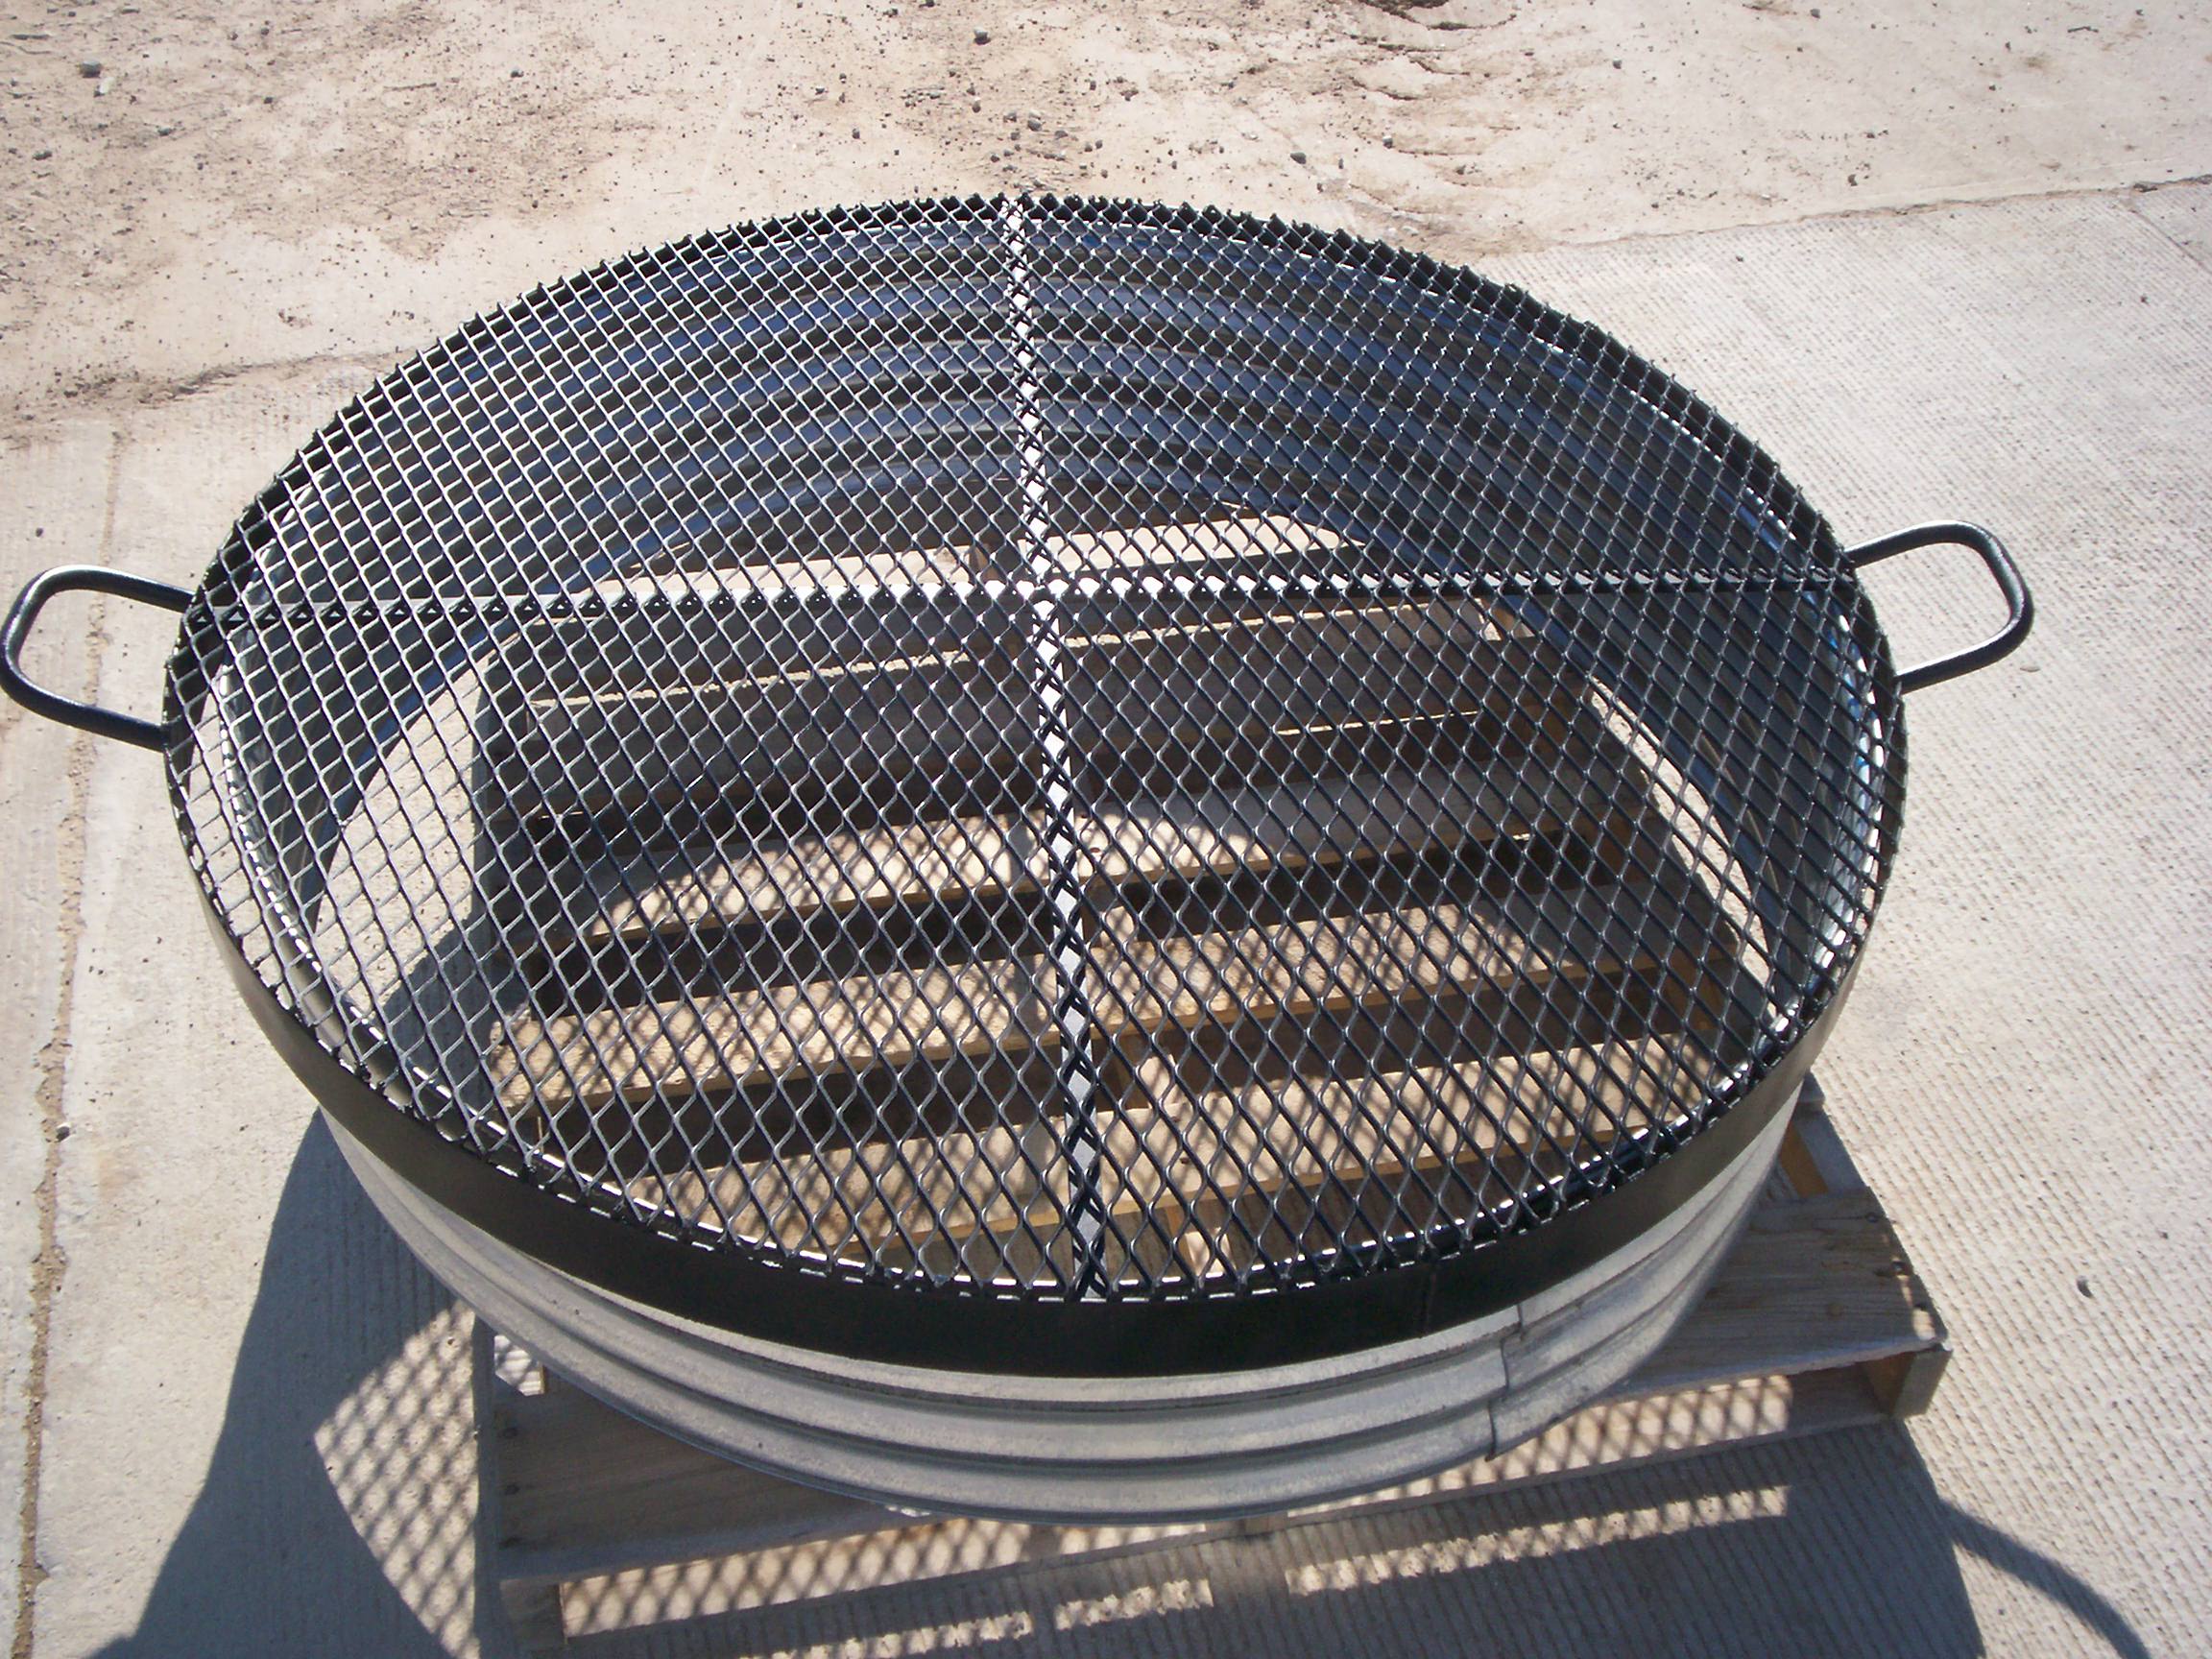 Fire Pit Rings Cadillac Culvert Inc, 48 Inch Fire Pit Ring